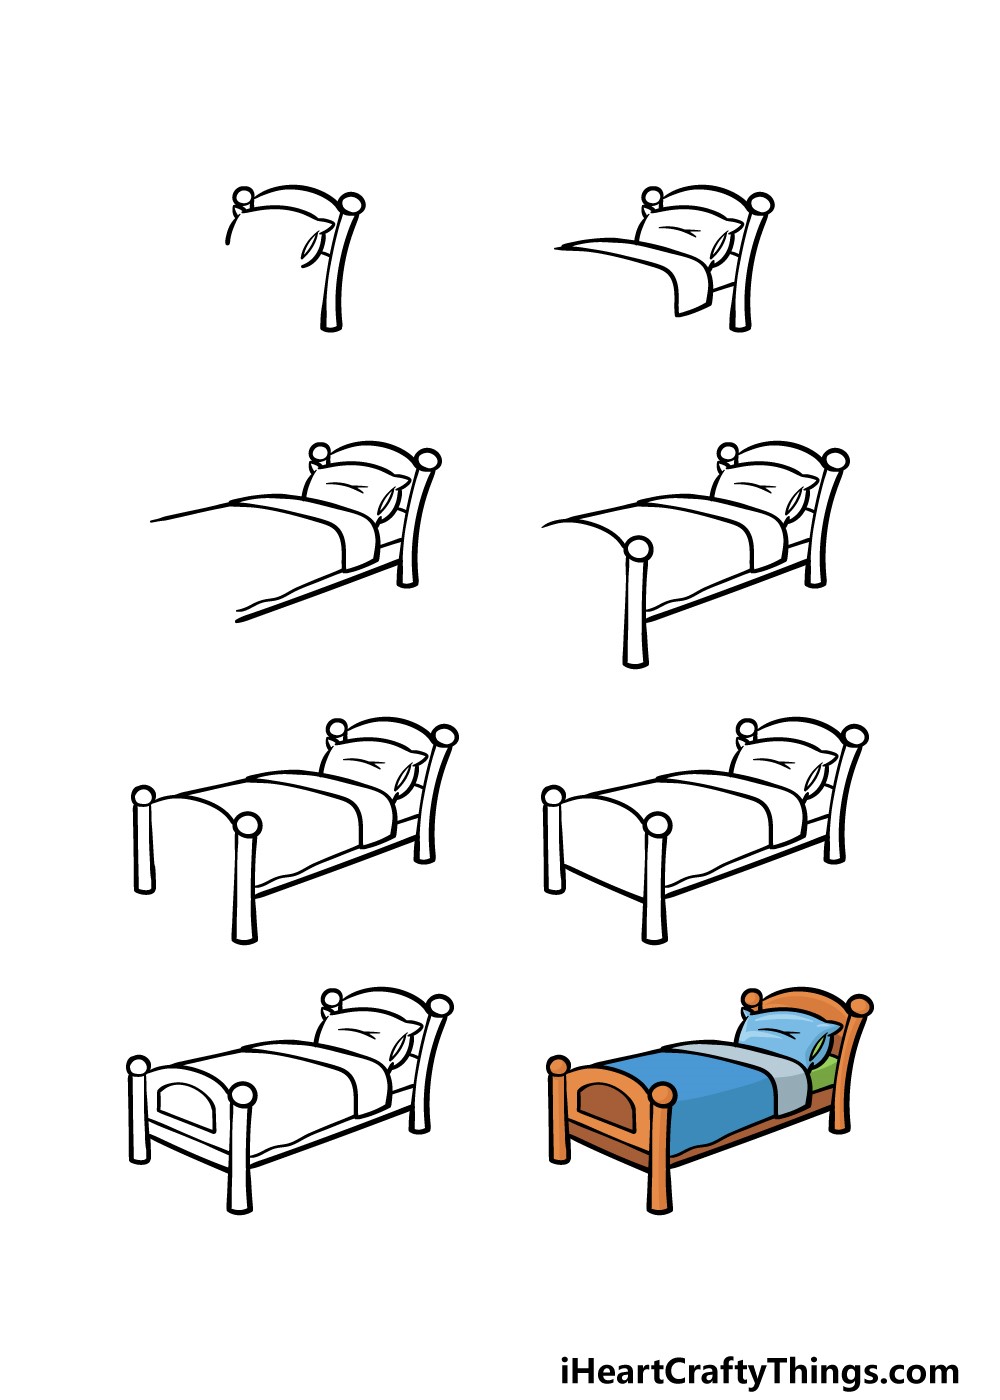 Bed ideas 4 Drawing Ideas